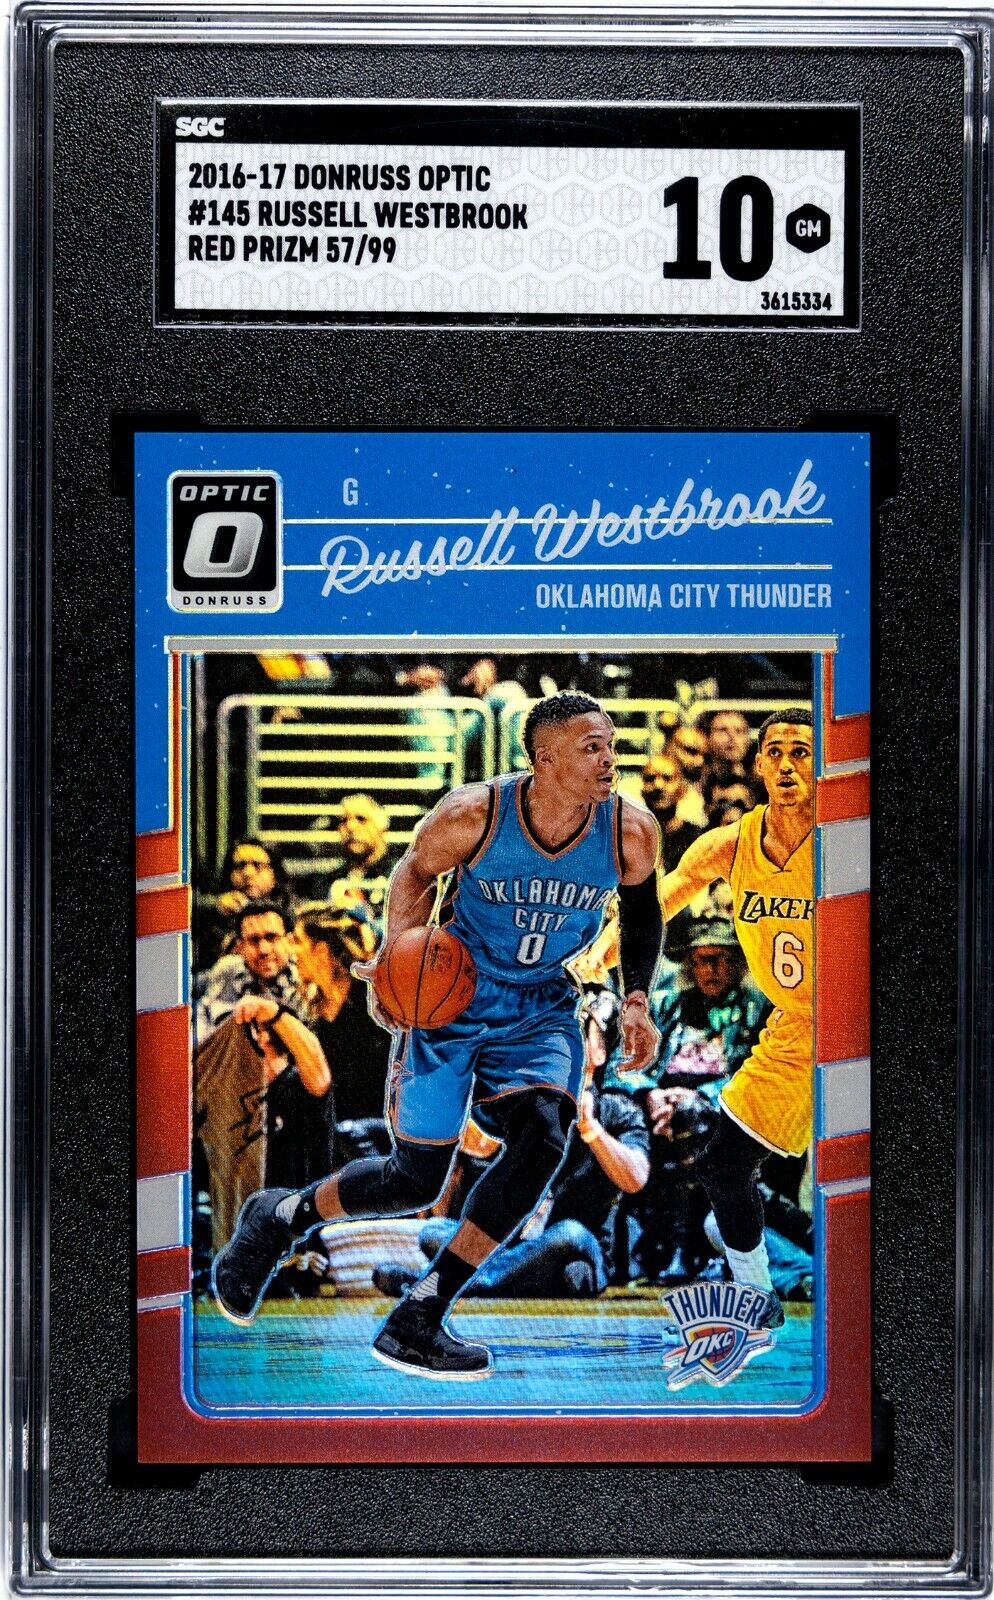 2016-17 Donruss Optic Red #145 Russell Westbrook Thunder /99 SGC 10